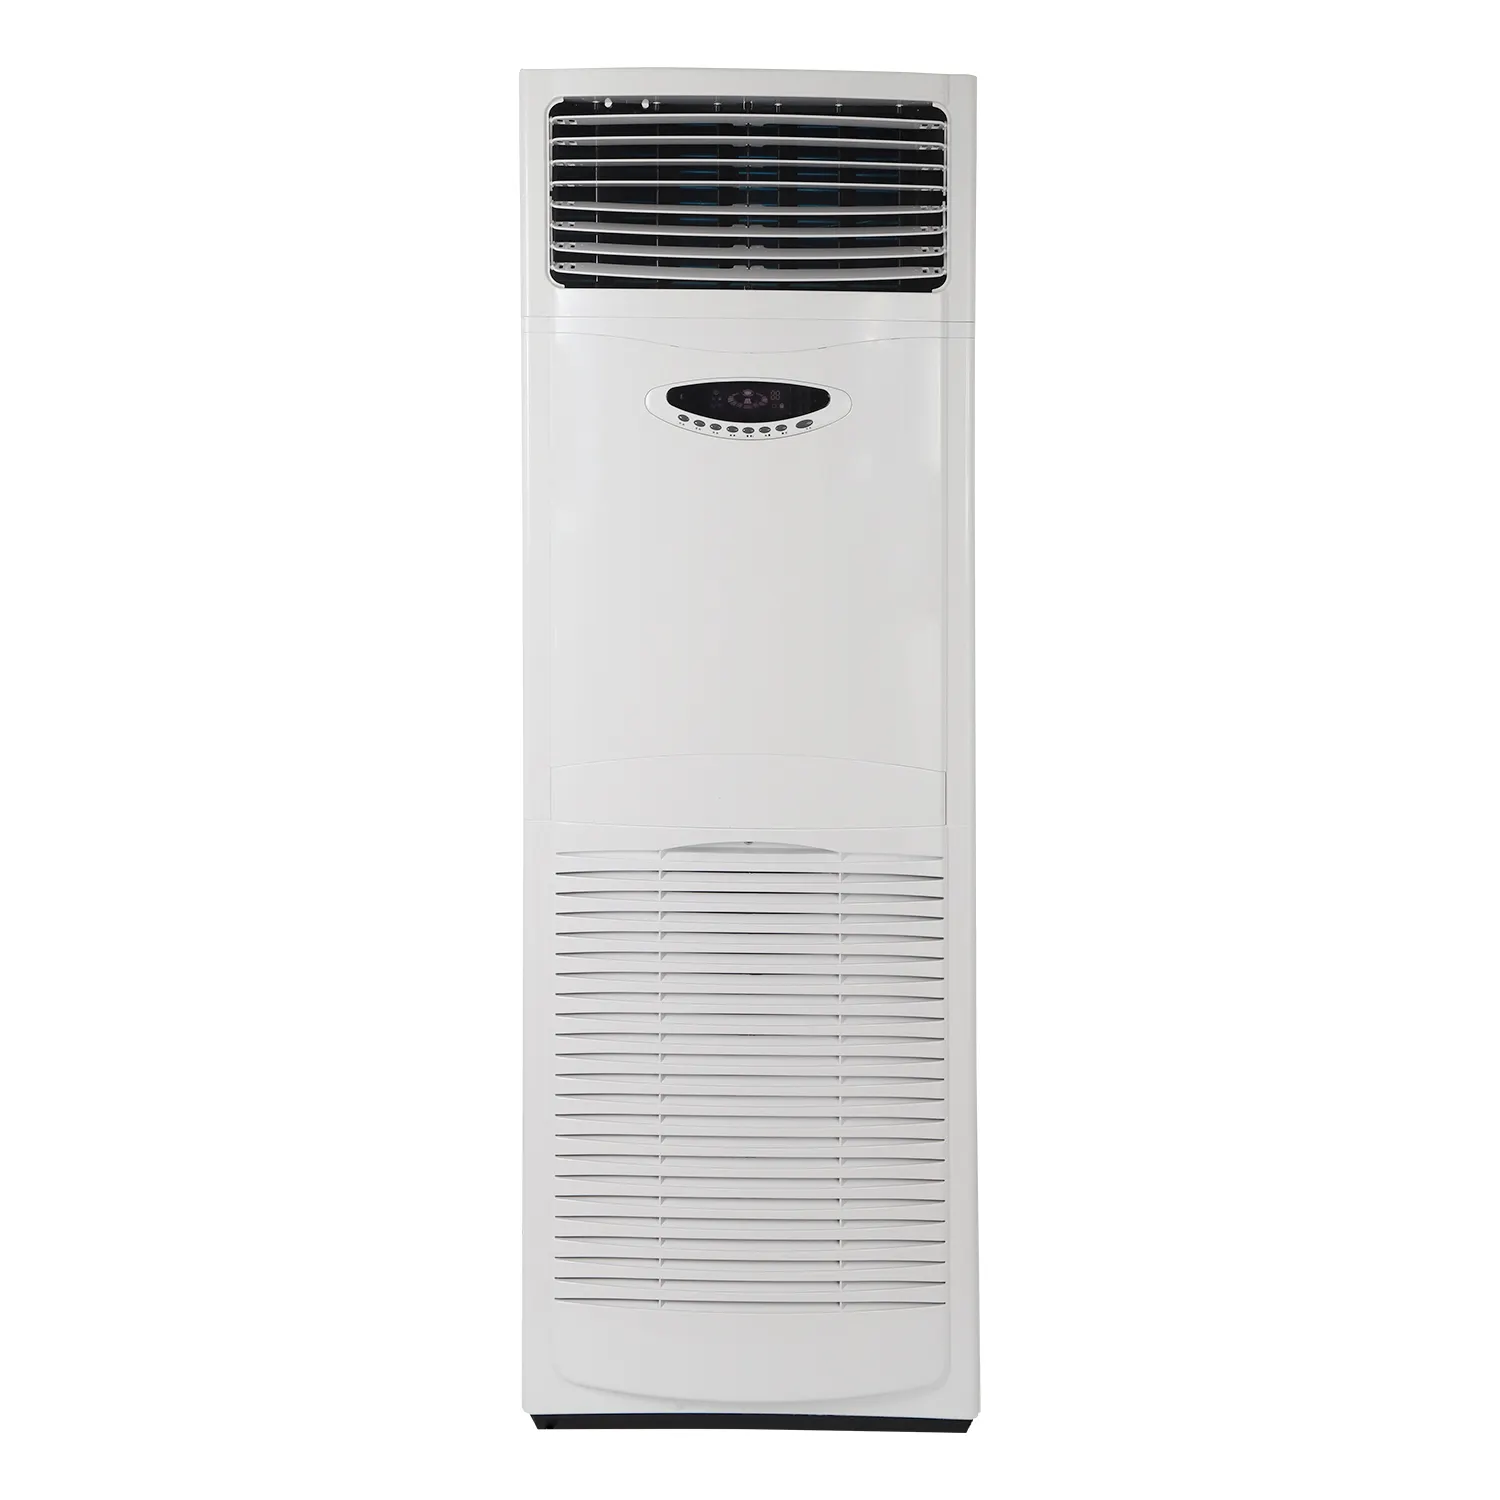 48000-60000BTU Floor standing air conditioner for Commercial